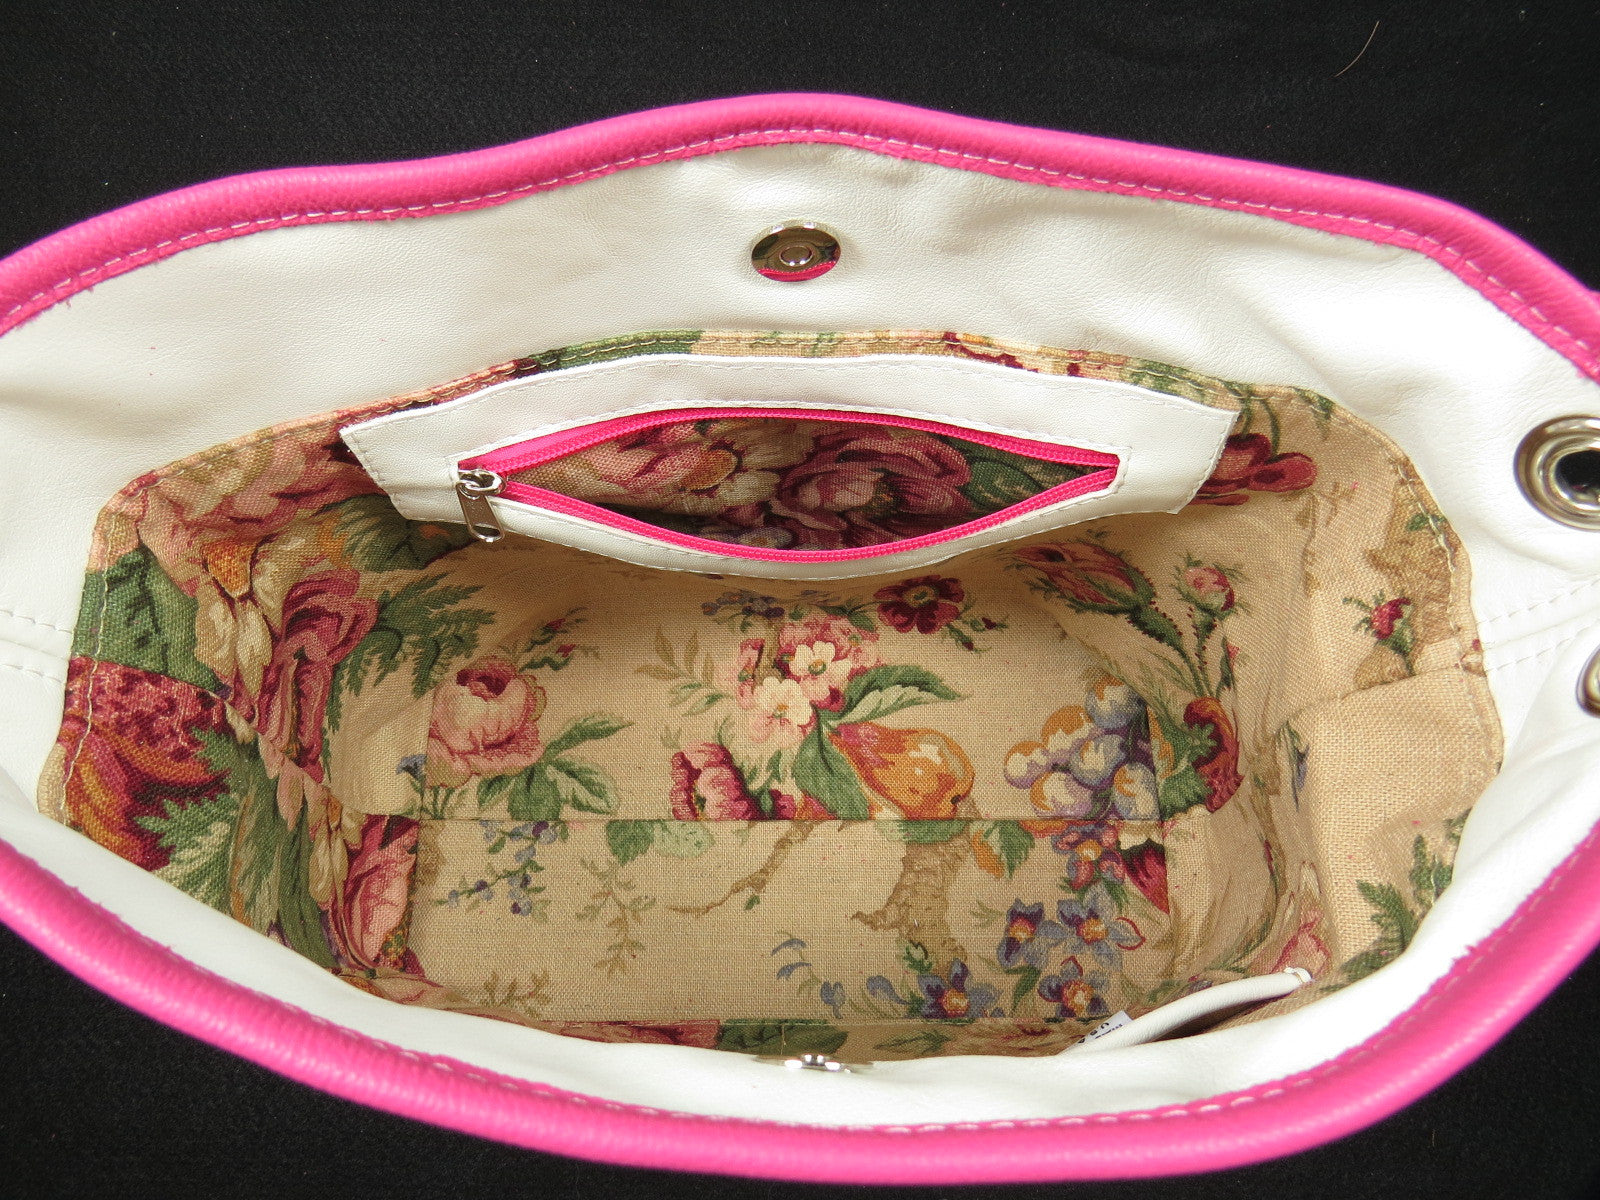 Pink Roses on White Slouchy Hobo Leather Bag interior zipper pocket